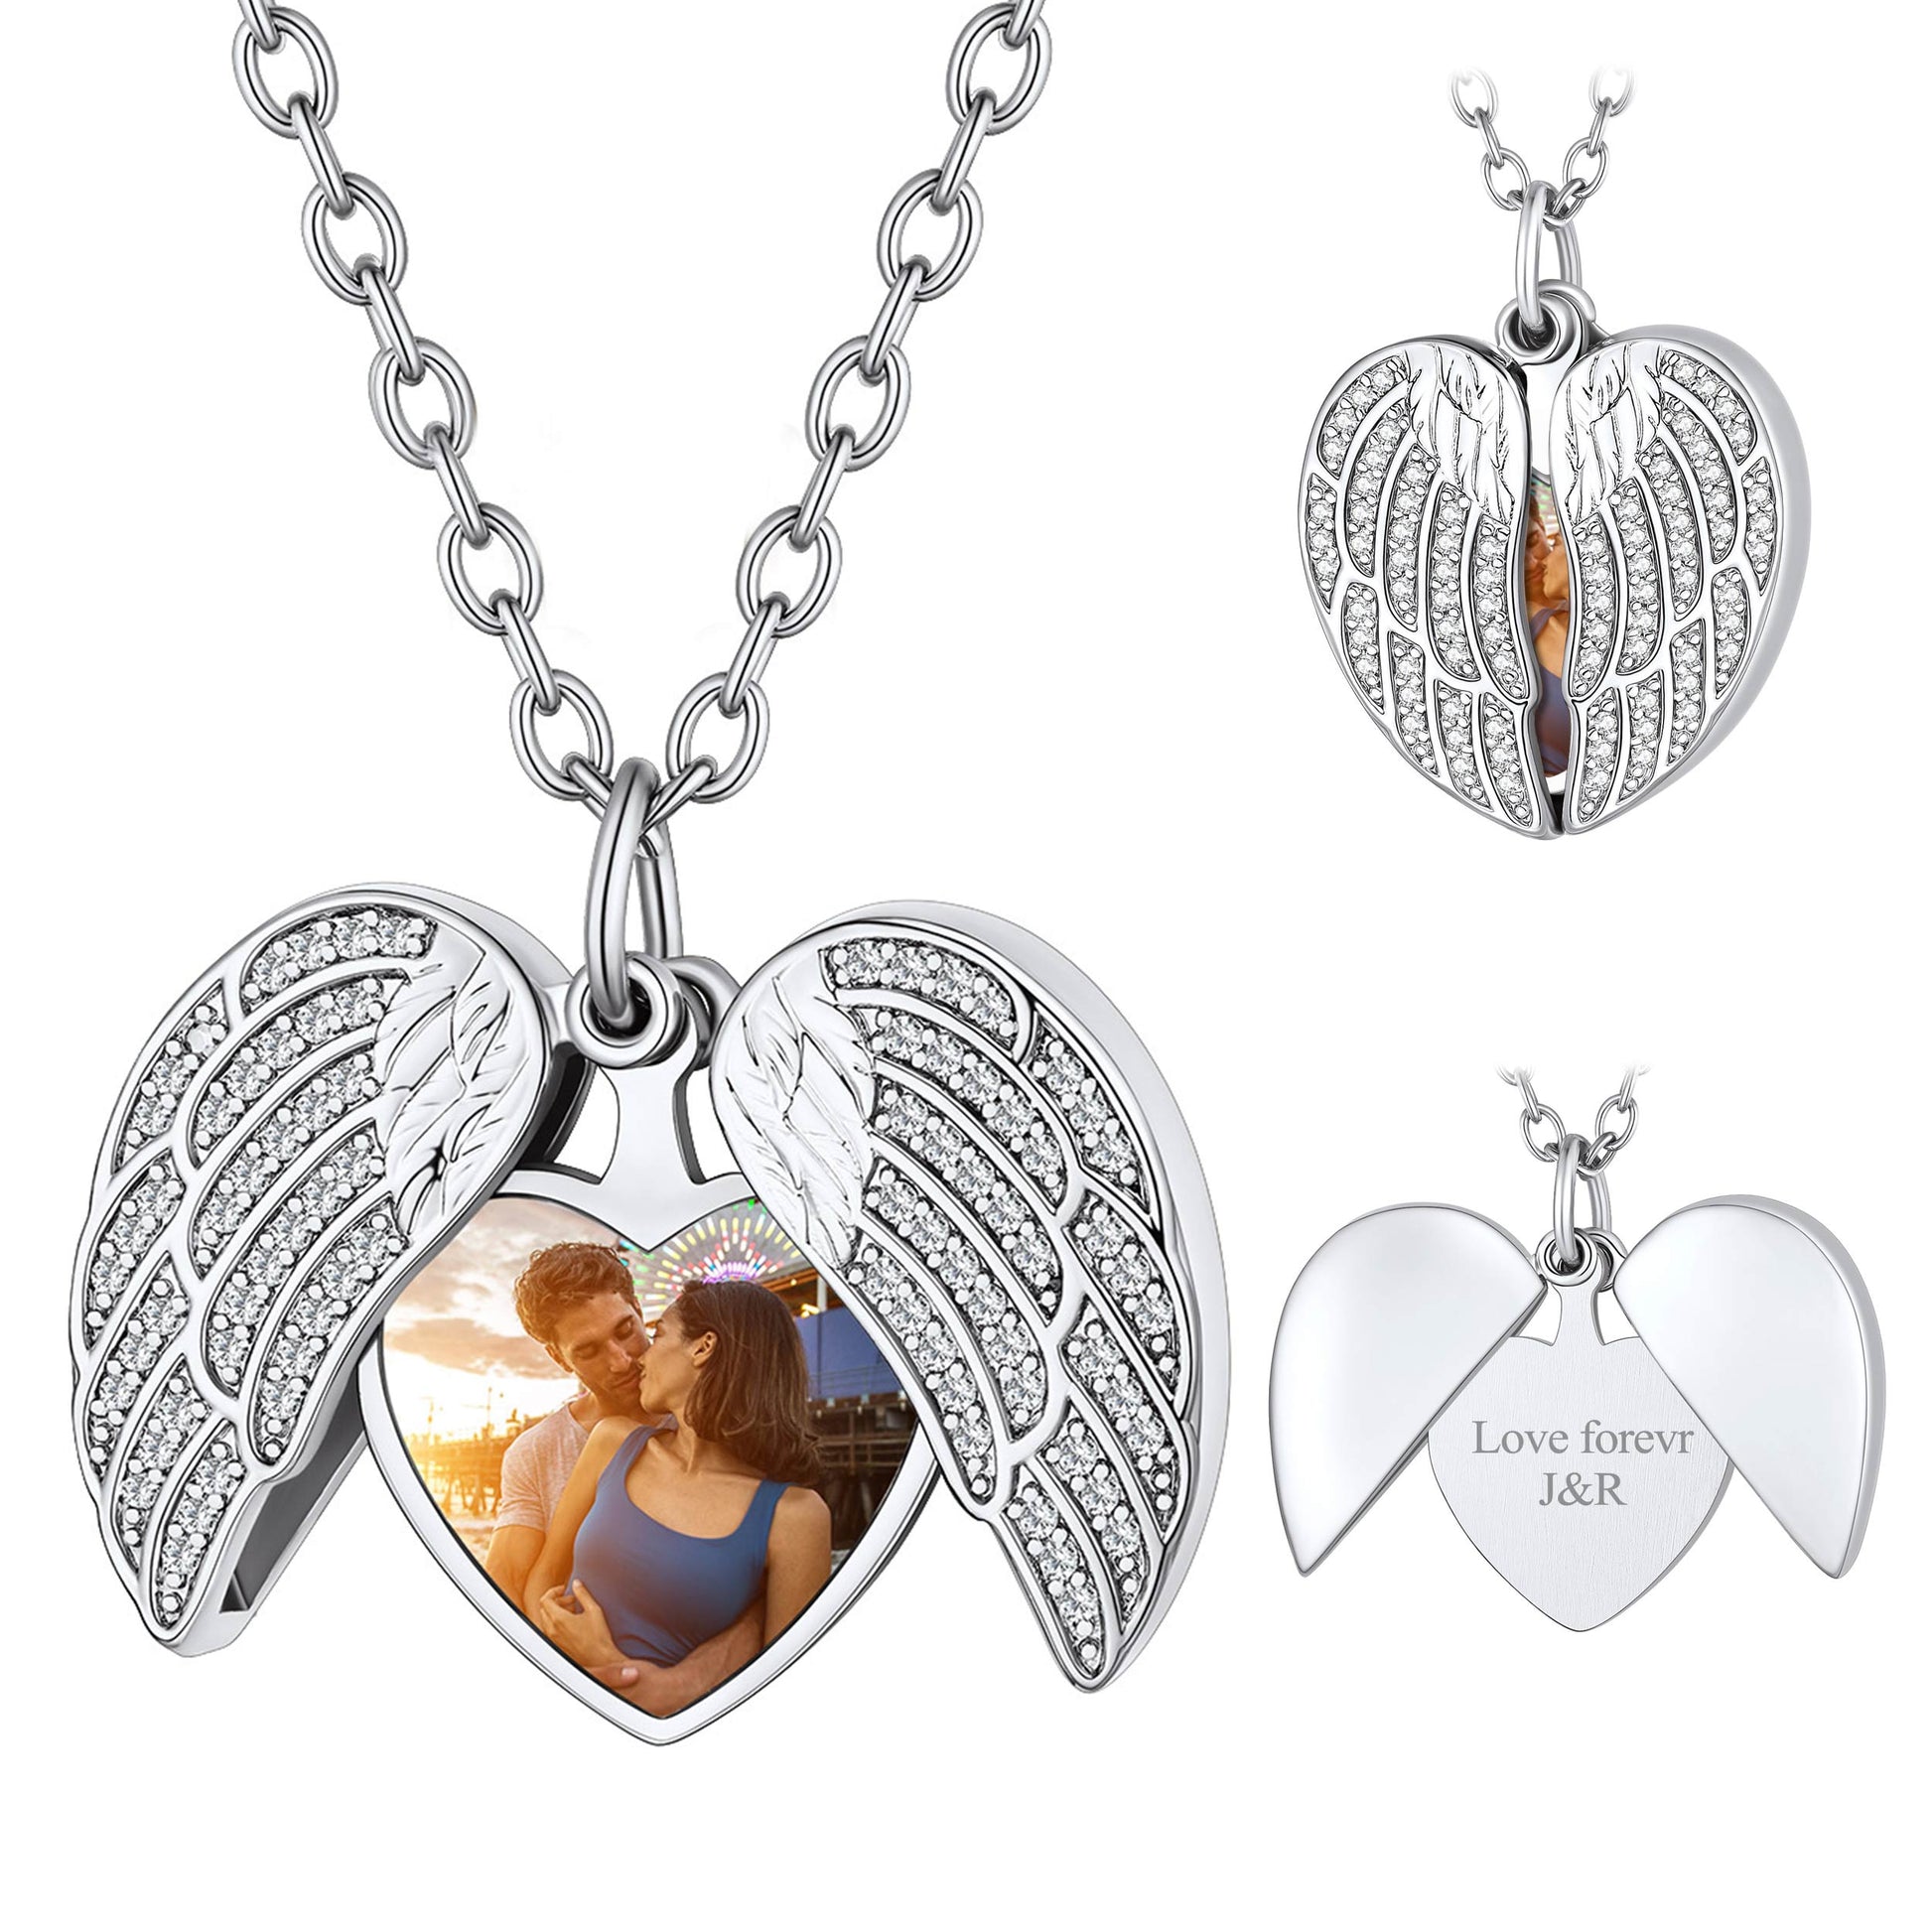 Customized Angel Wings Heart Locket Necklace with Picture